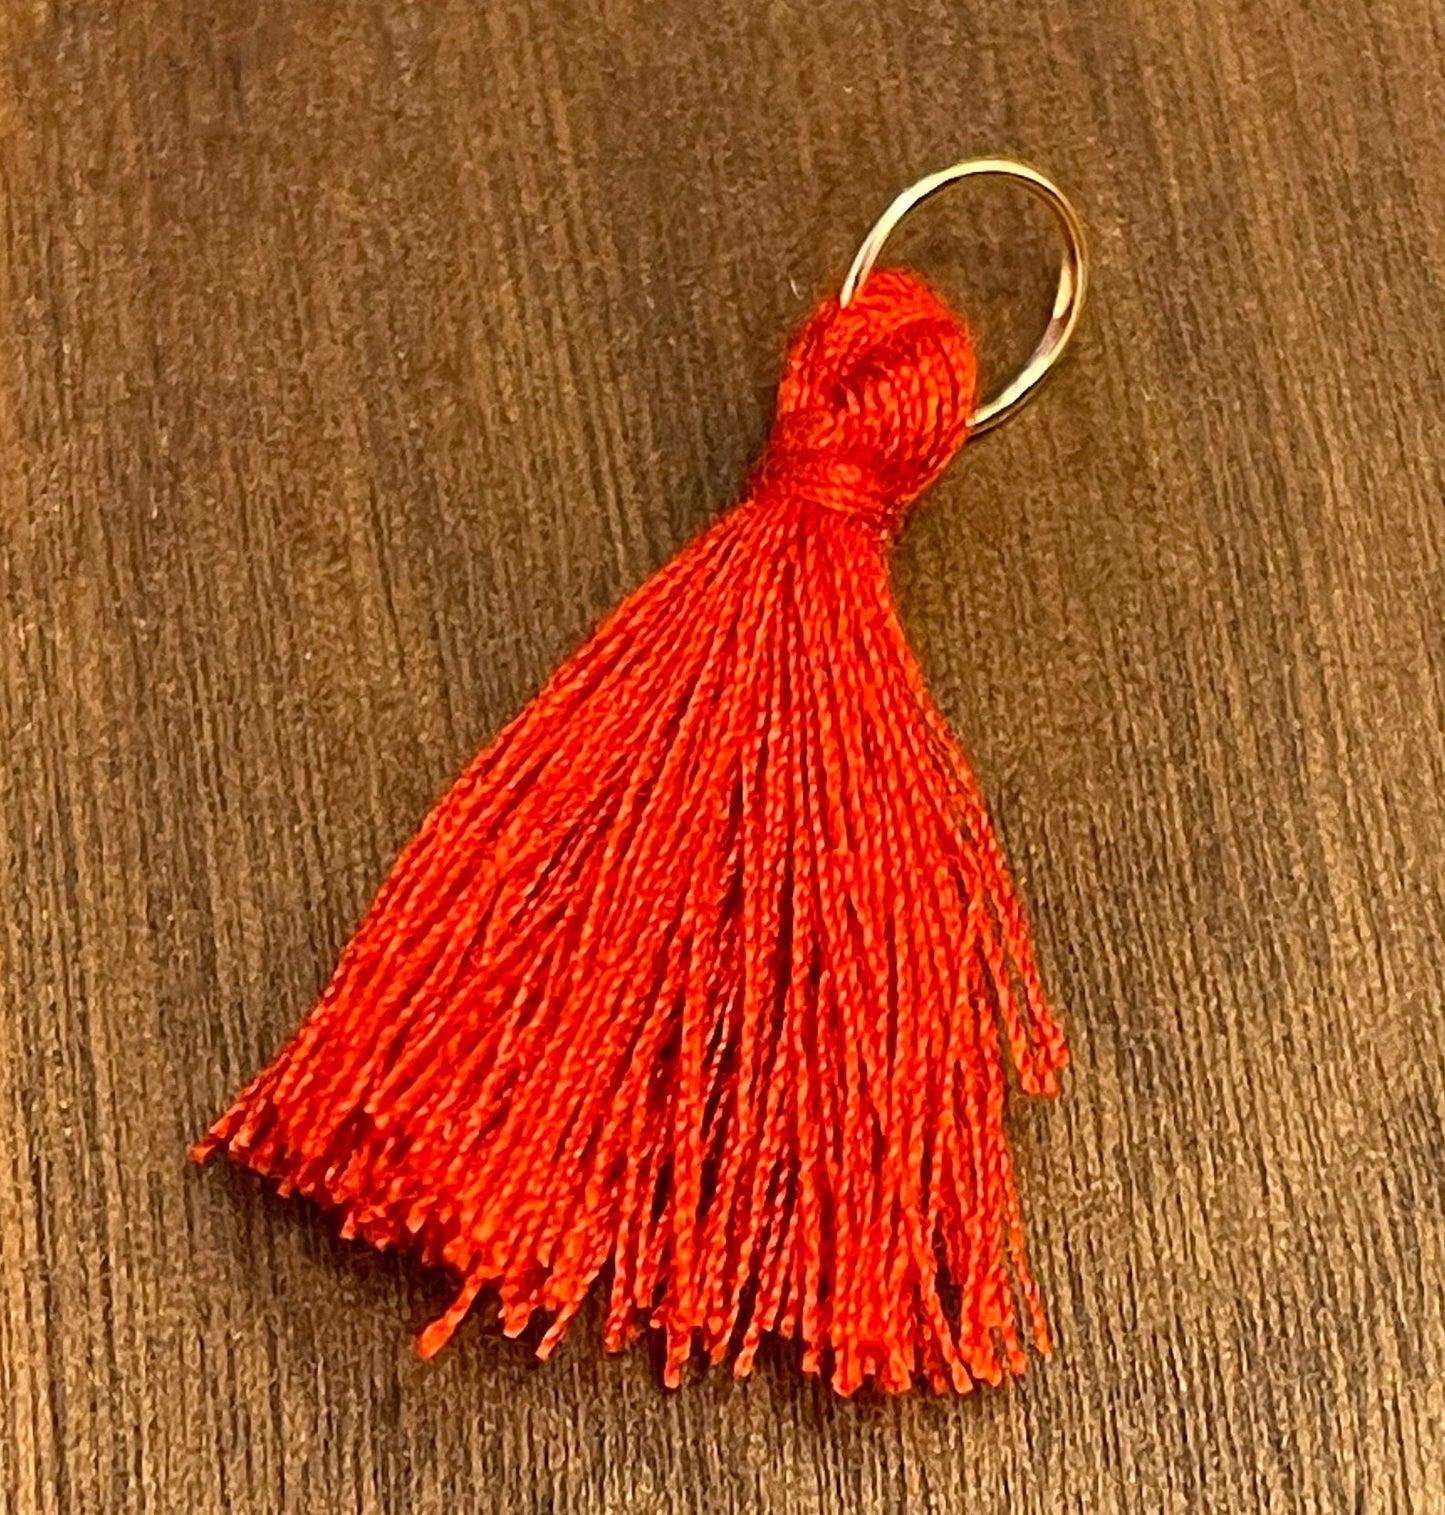 Mini Cotton Tassels- Double Rainbow set of 22 (2 of each color!); add jumpring; earrings-jewelry, accessory, charm, bracelet, necklace, mala